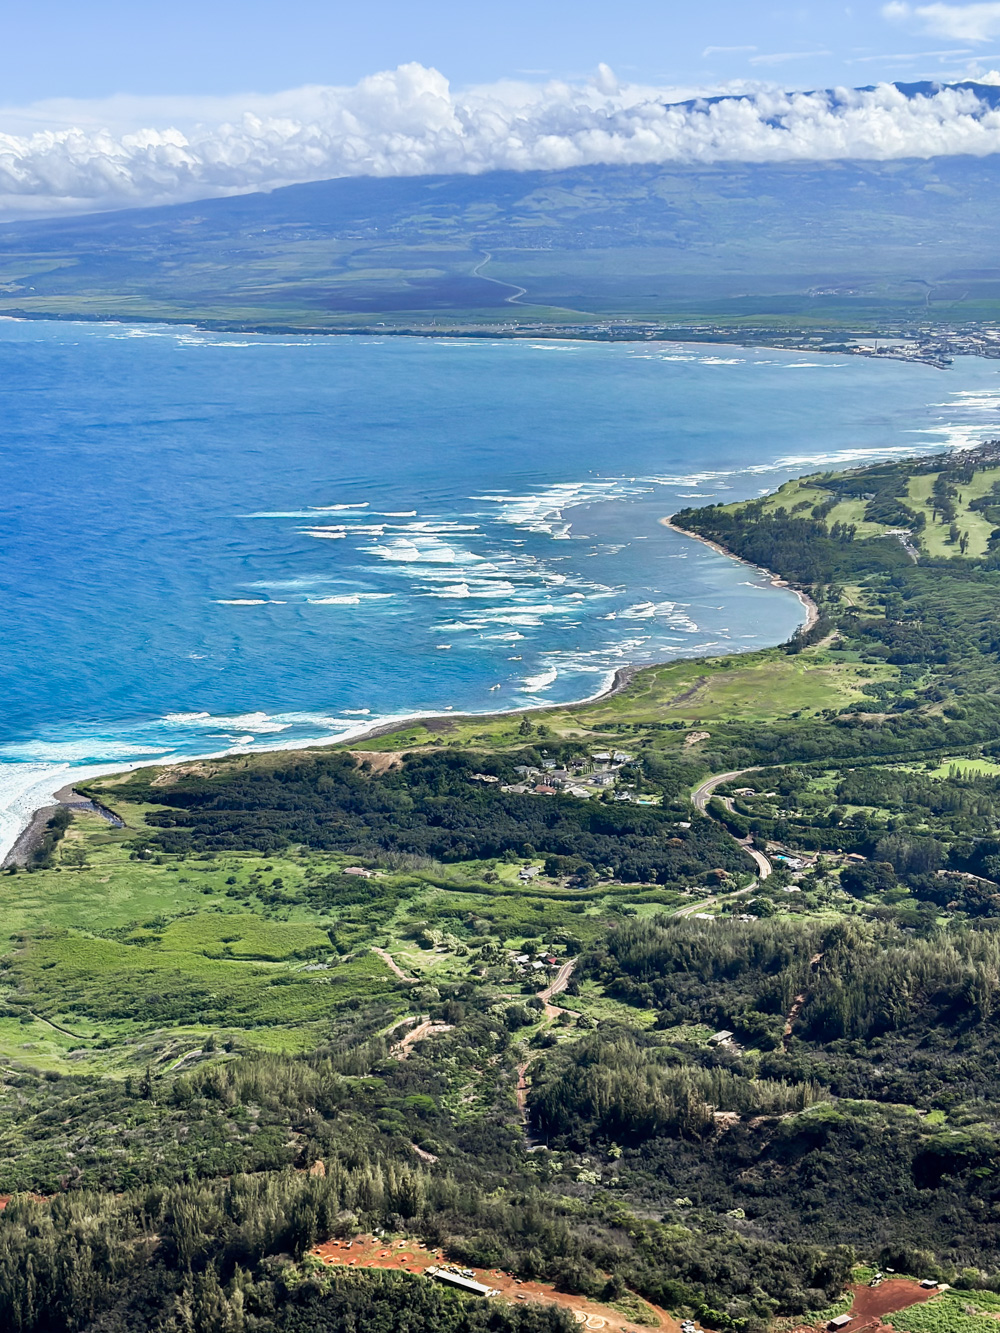 Should I Do a Doors-Off Helicopter in Maui? The View from Above